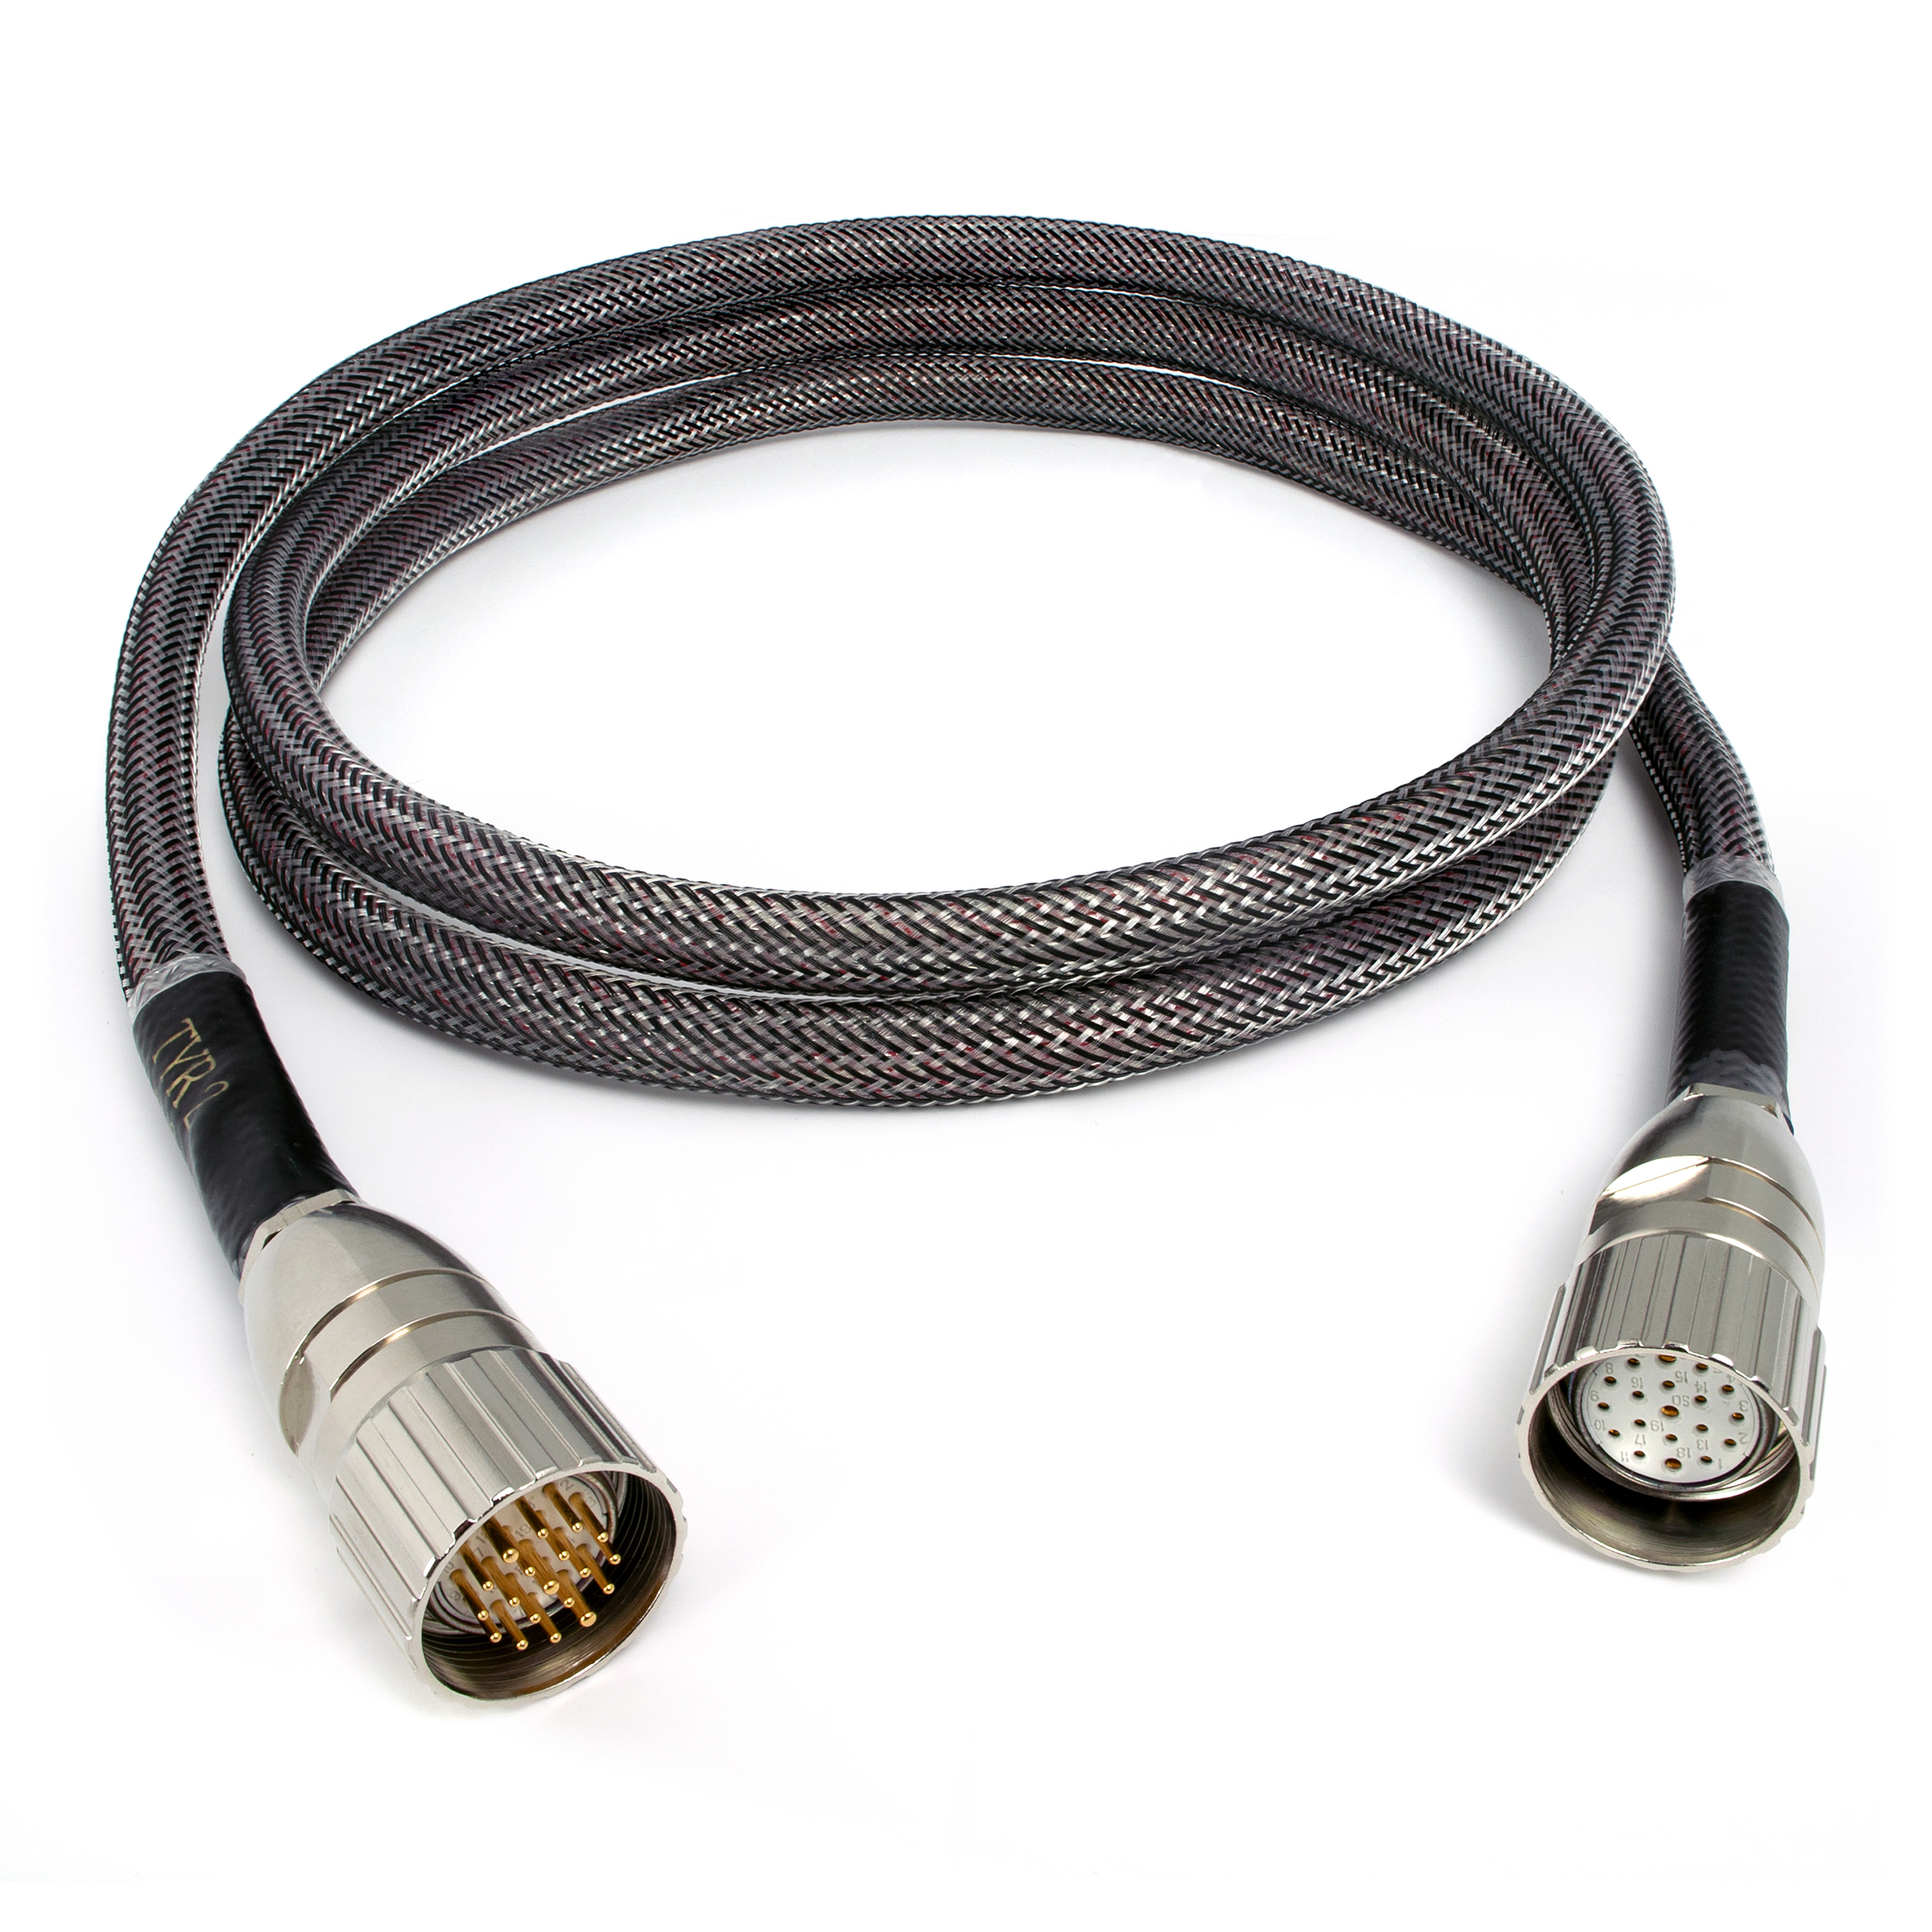 <p align="center">Tyr 2 Specialty X-1 Cable</p>